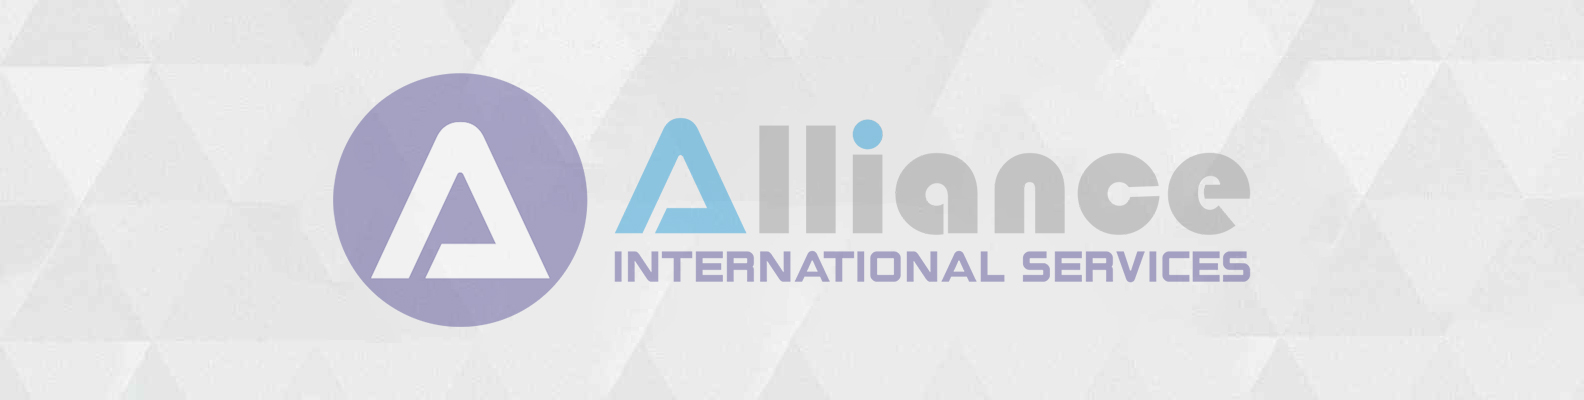 Alliance Recruitment Agency Introduces The New Logo